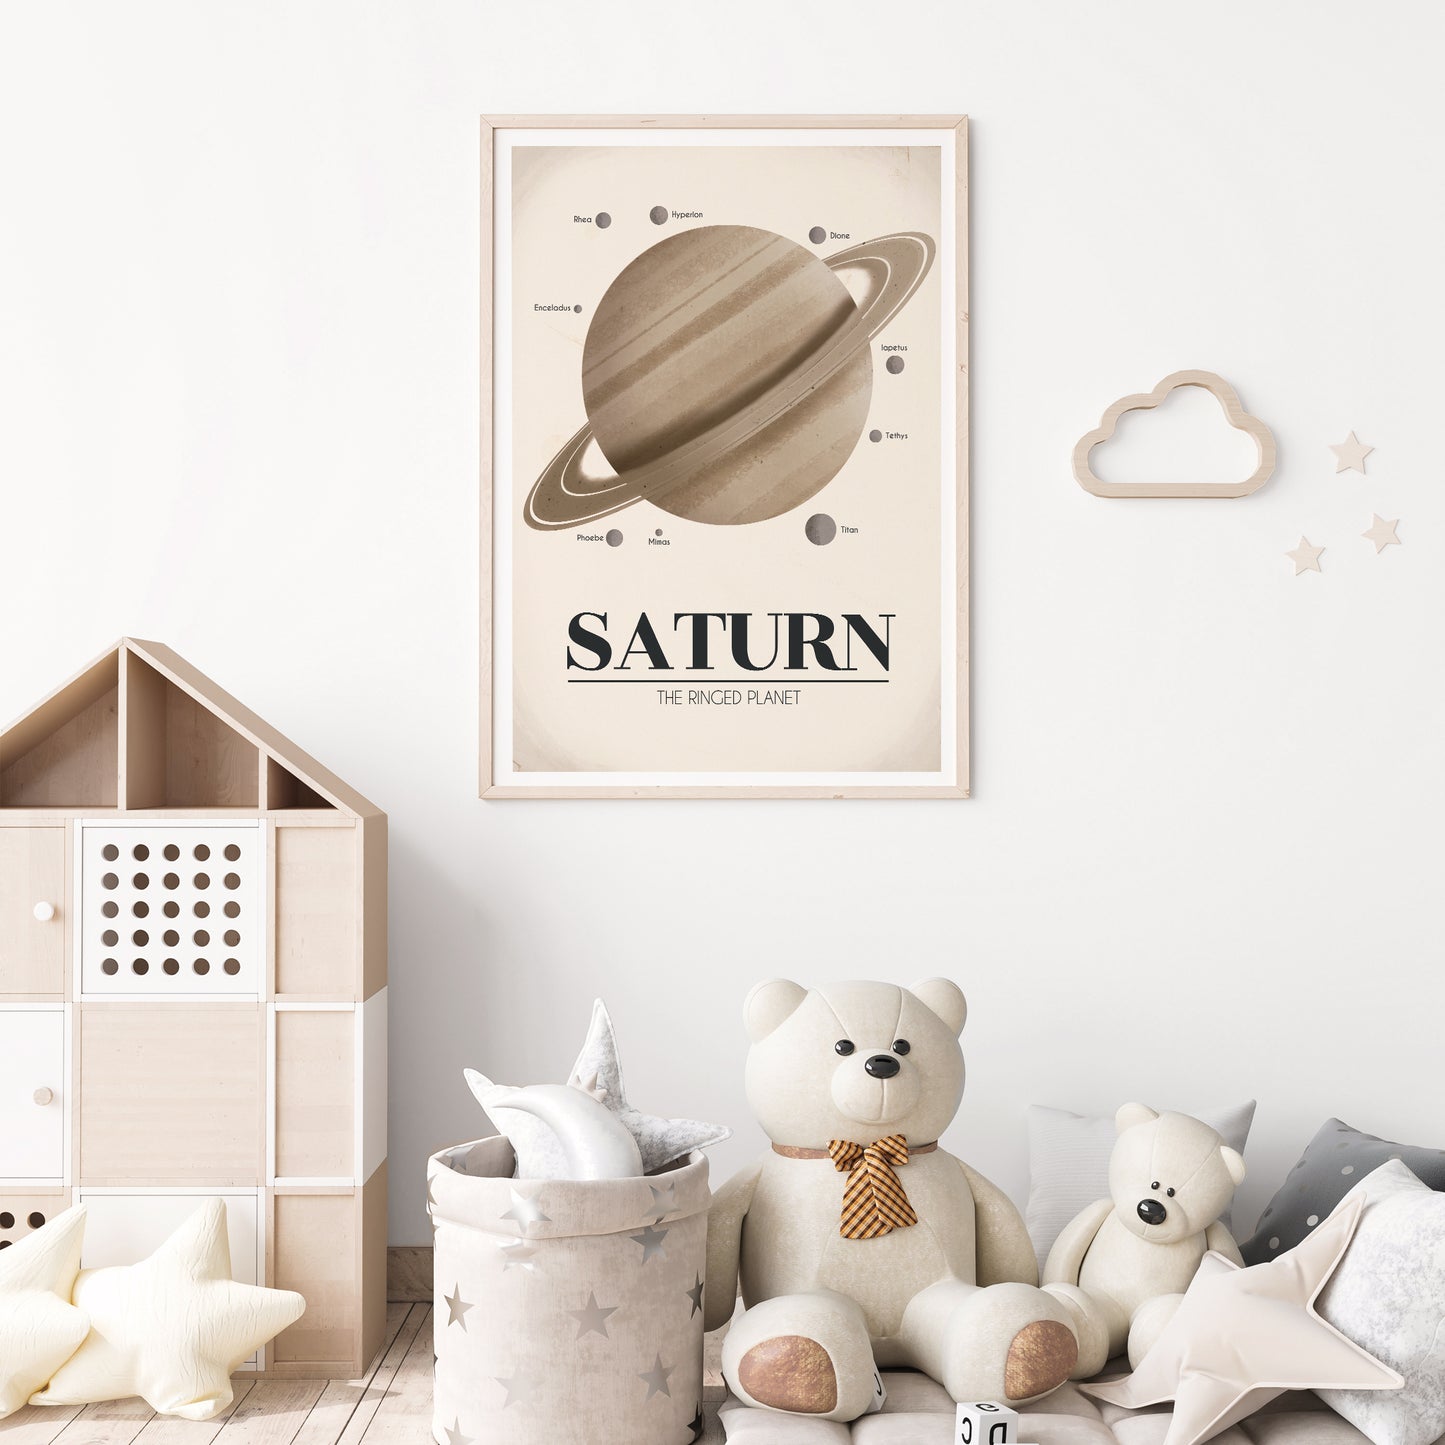 Planets of the solar system print - Saturn